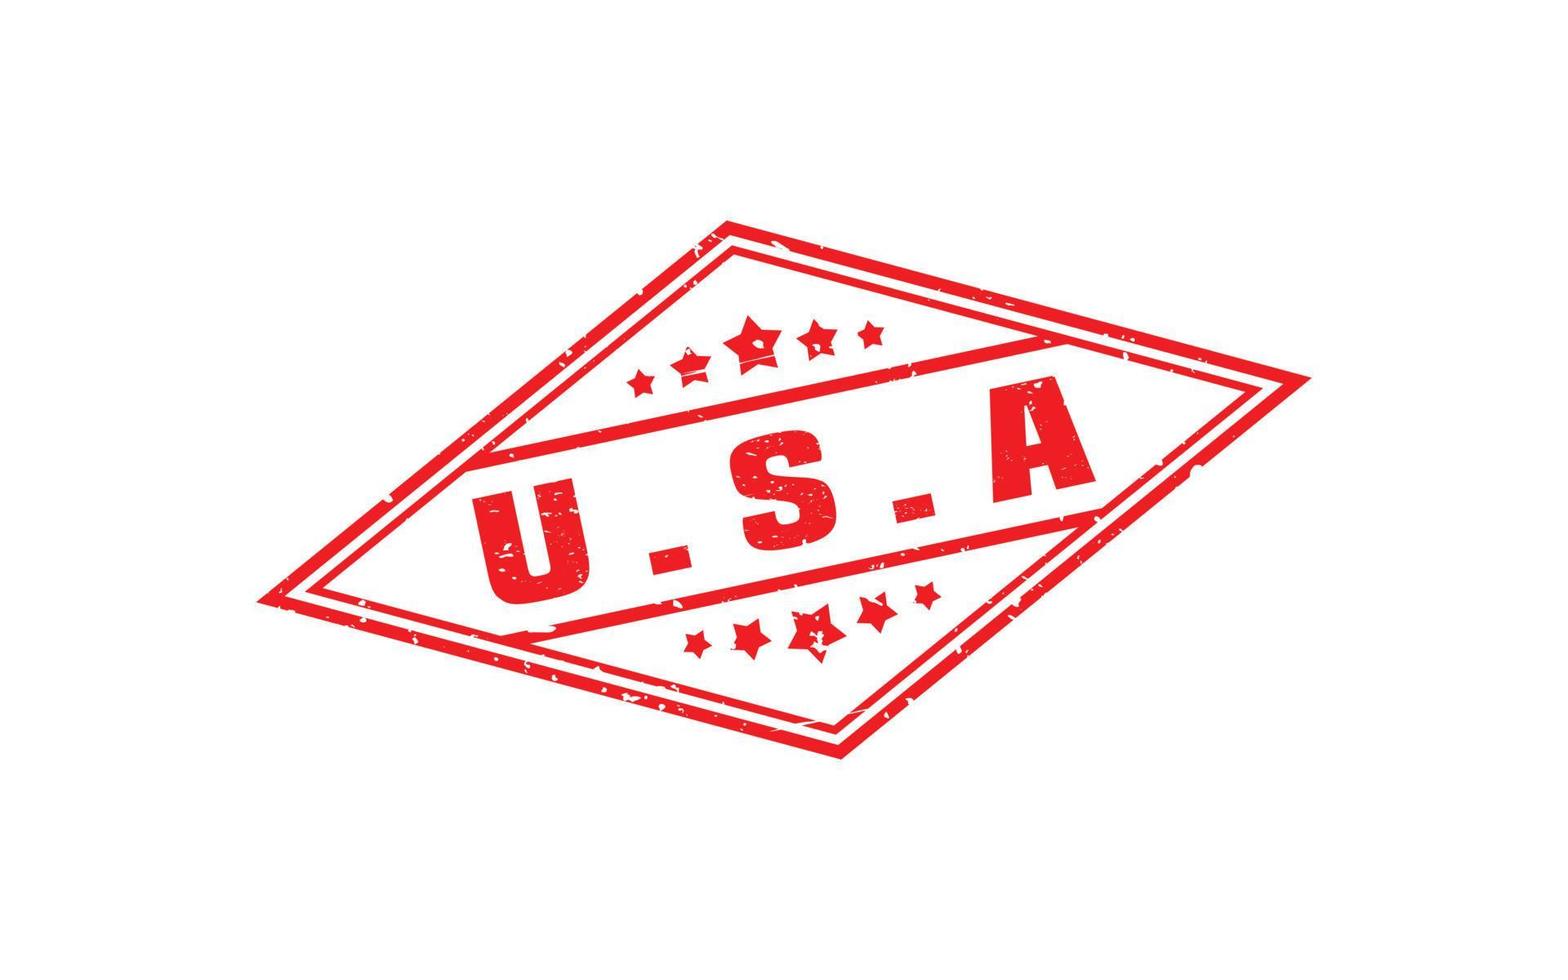 American USA stamp rubber with grunge style on white background vector